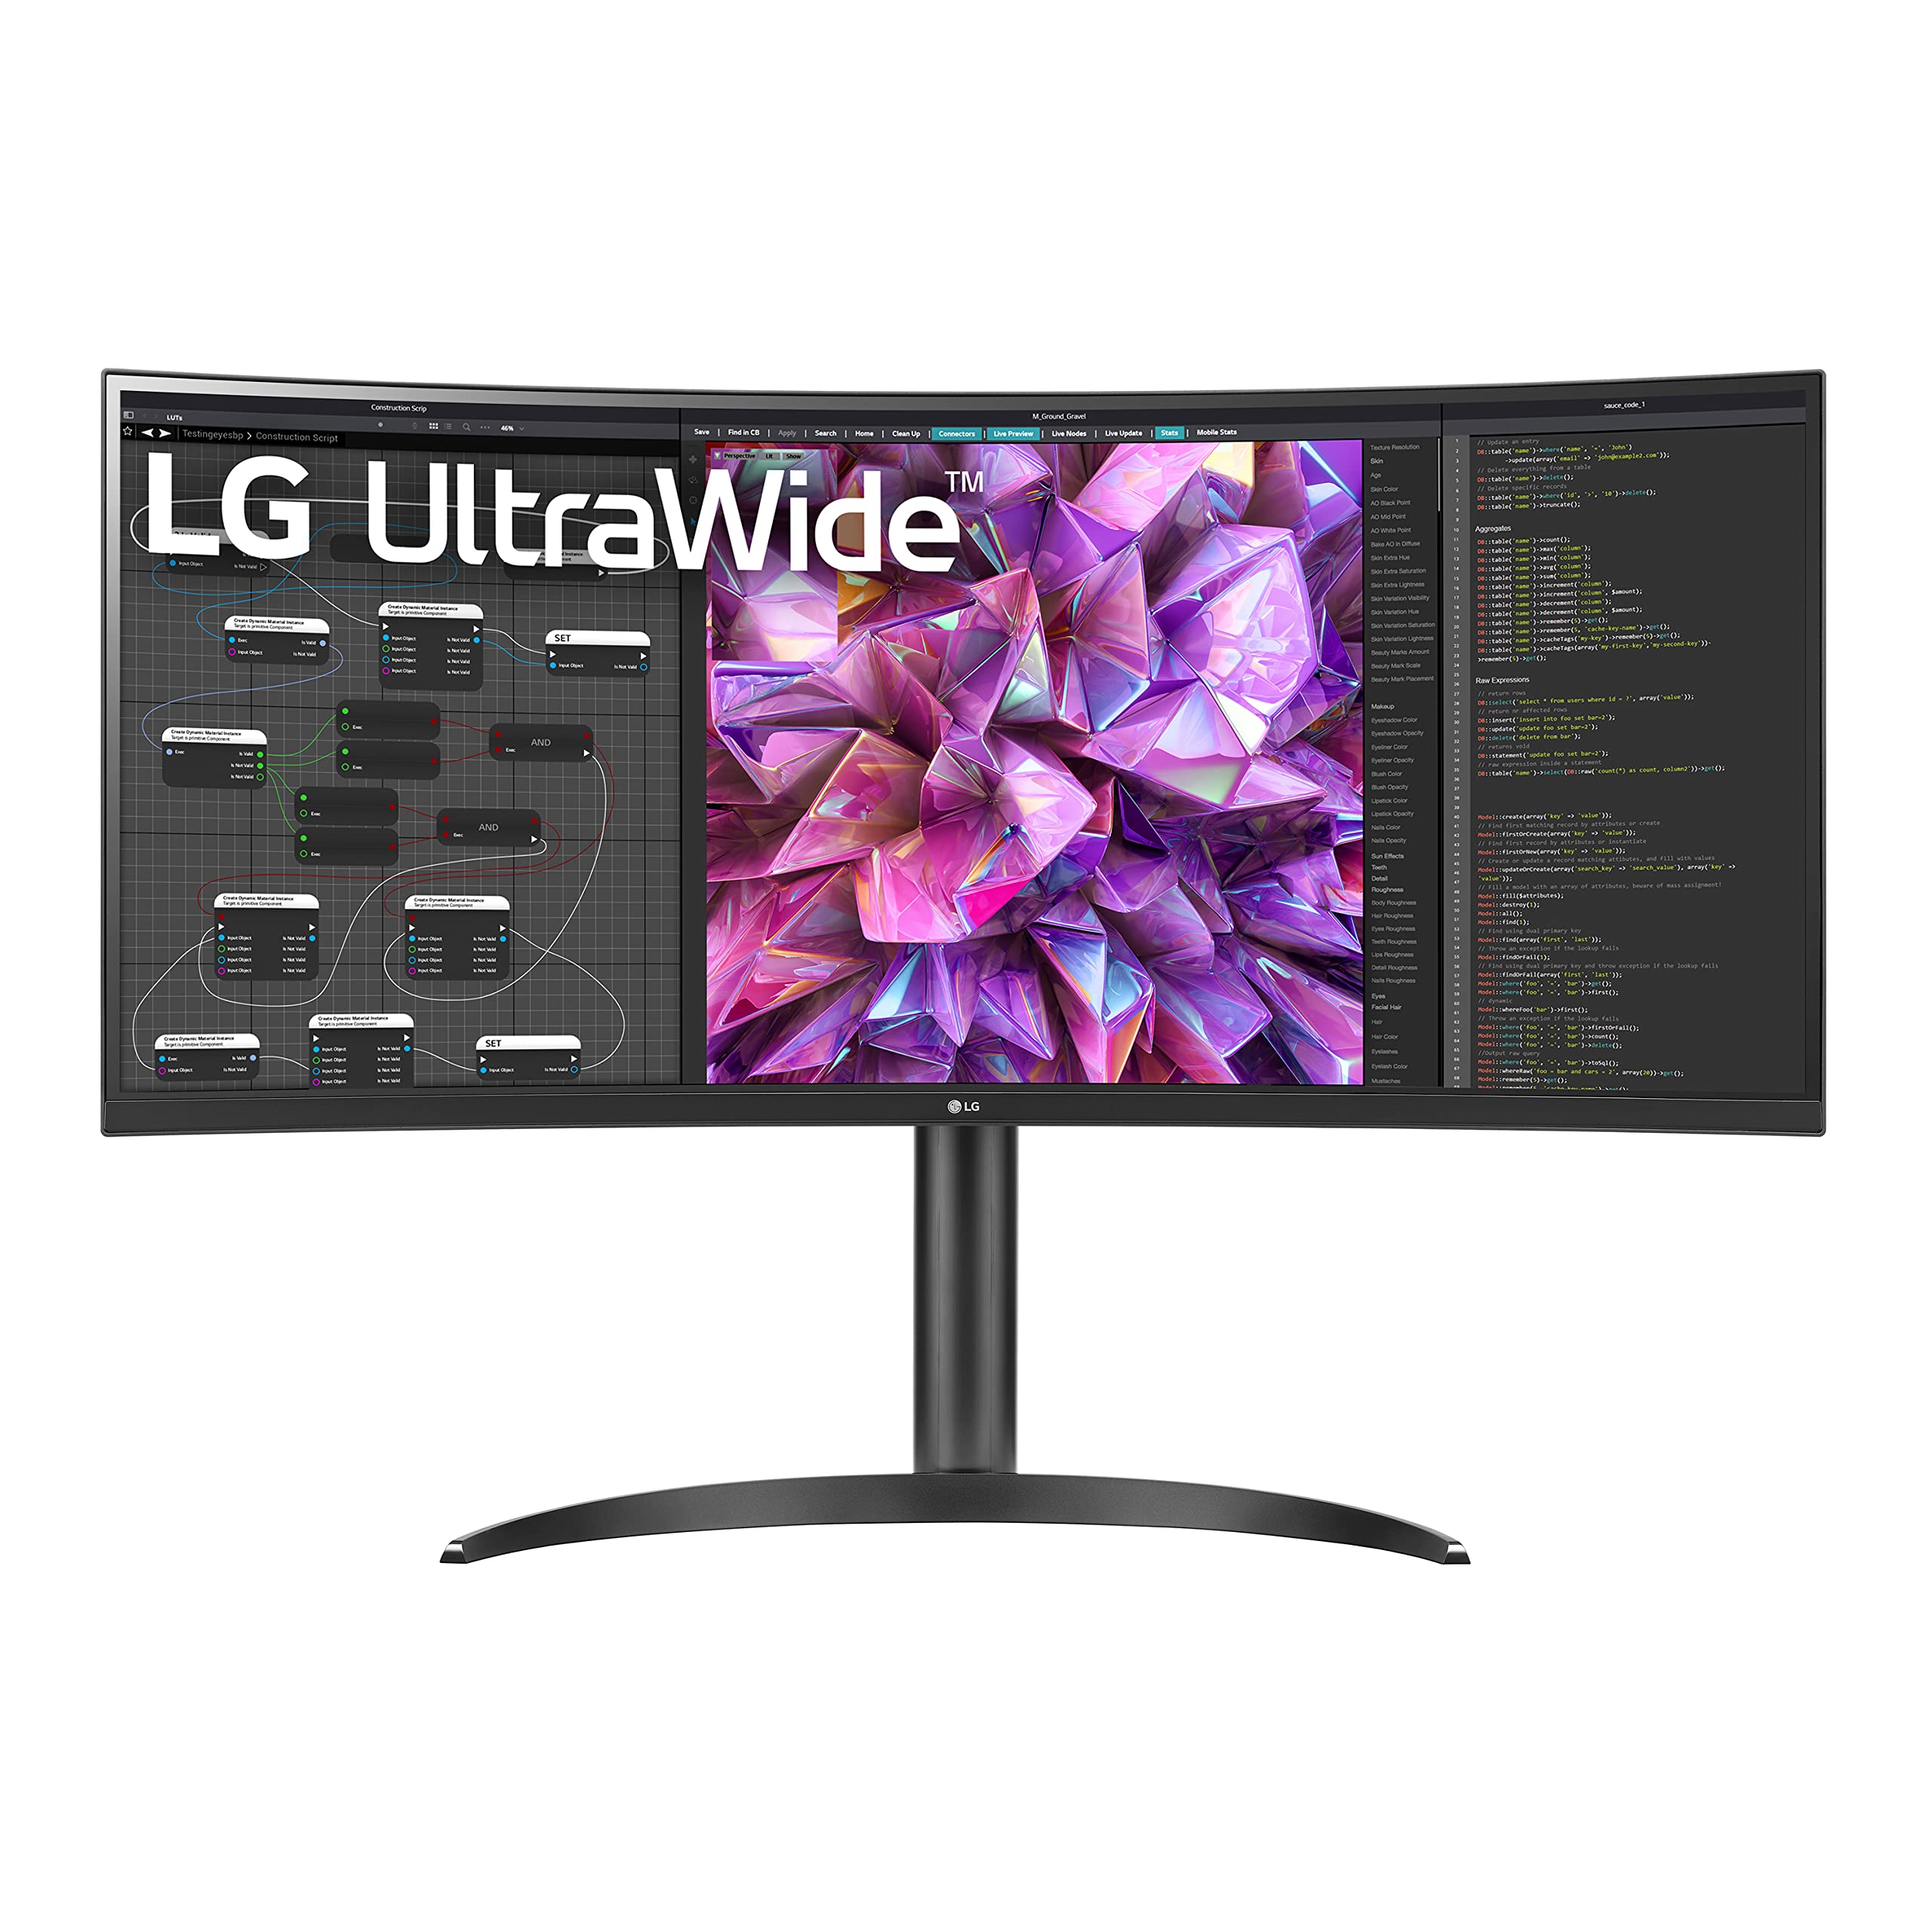 LG UltraWide QHD 34-Inch Curved Computer Monitor 34WQ73A-B, IPS with HDR 10 Compatibility, Built-In-KVM, and USB Type-C, Black $329.99